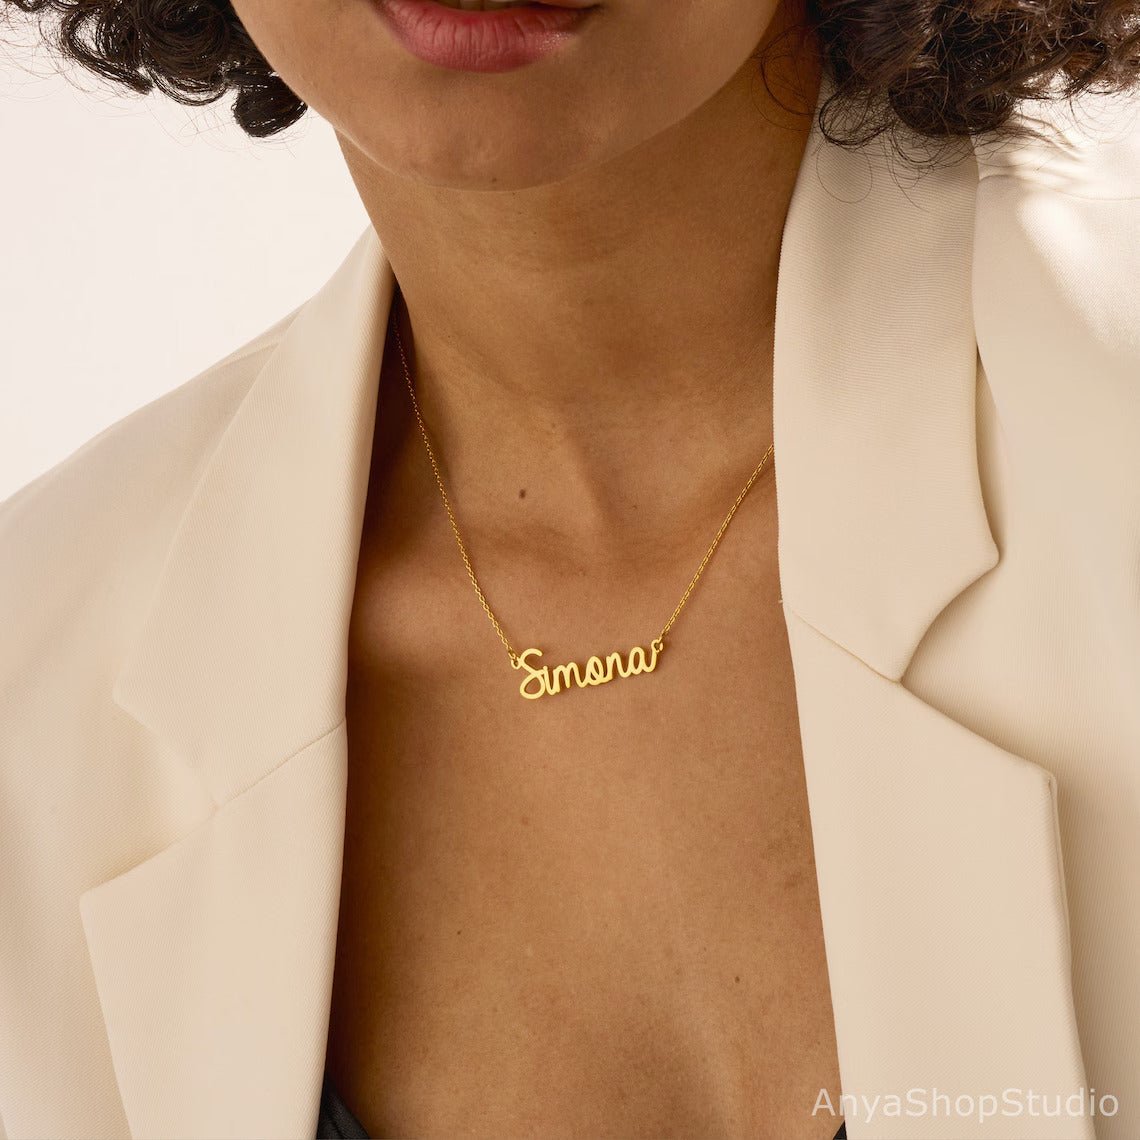 Custom Name Necklace, 18K Gold Plated Name Necklace, Personalized Name Necklace, Birthday Gift for Her, Mother's Day Gift, Gift for Mom - 我的商店